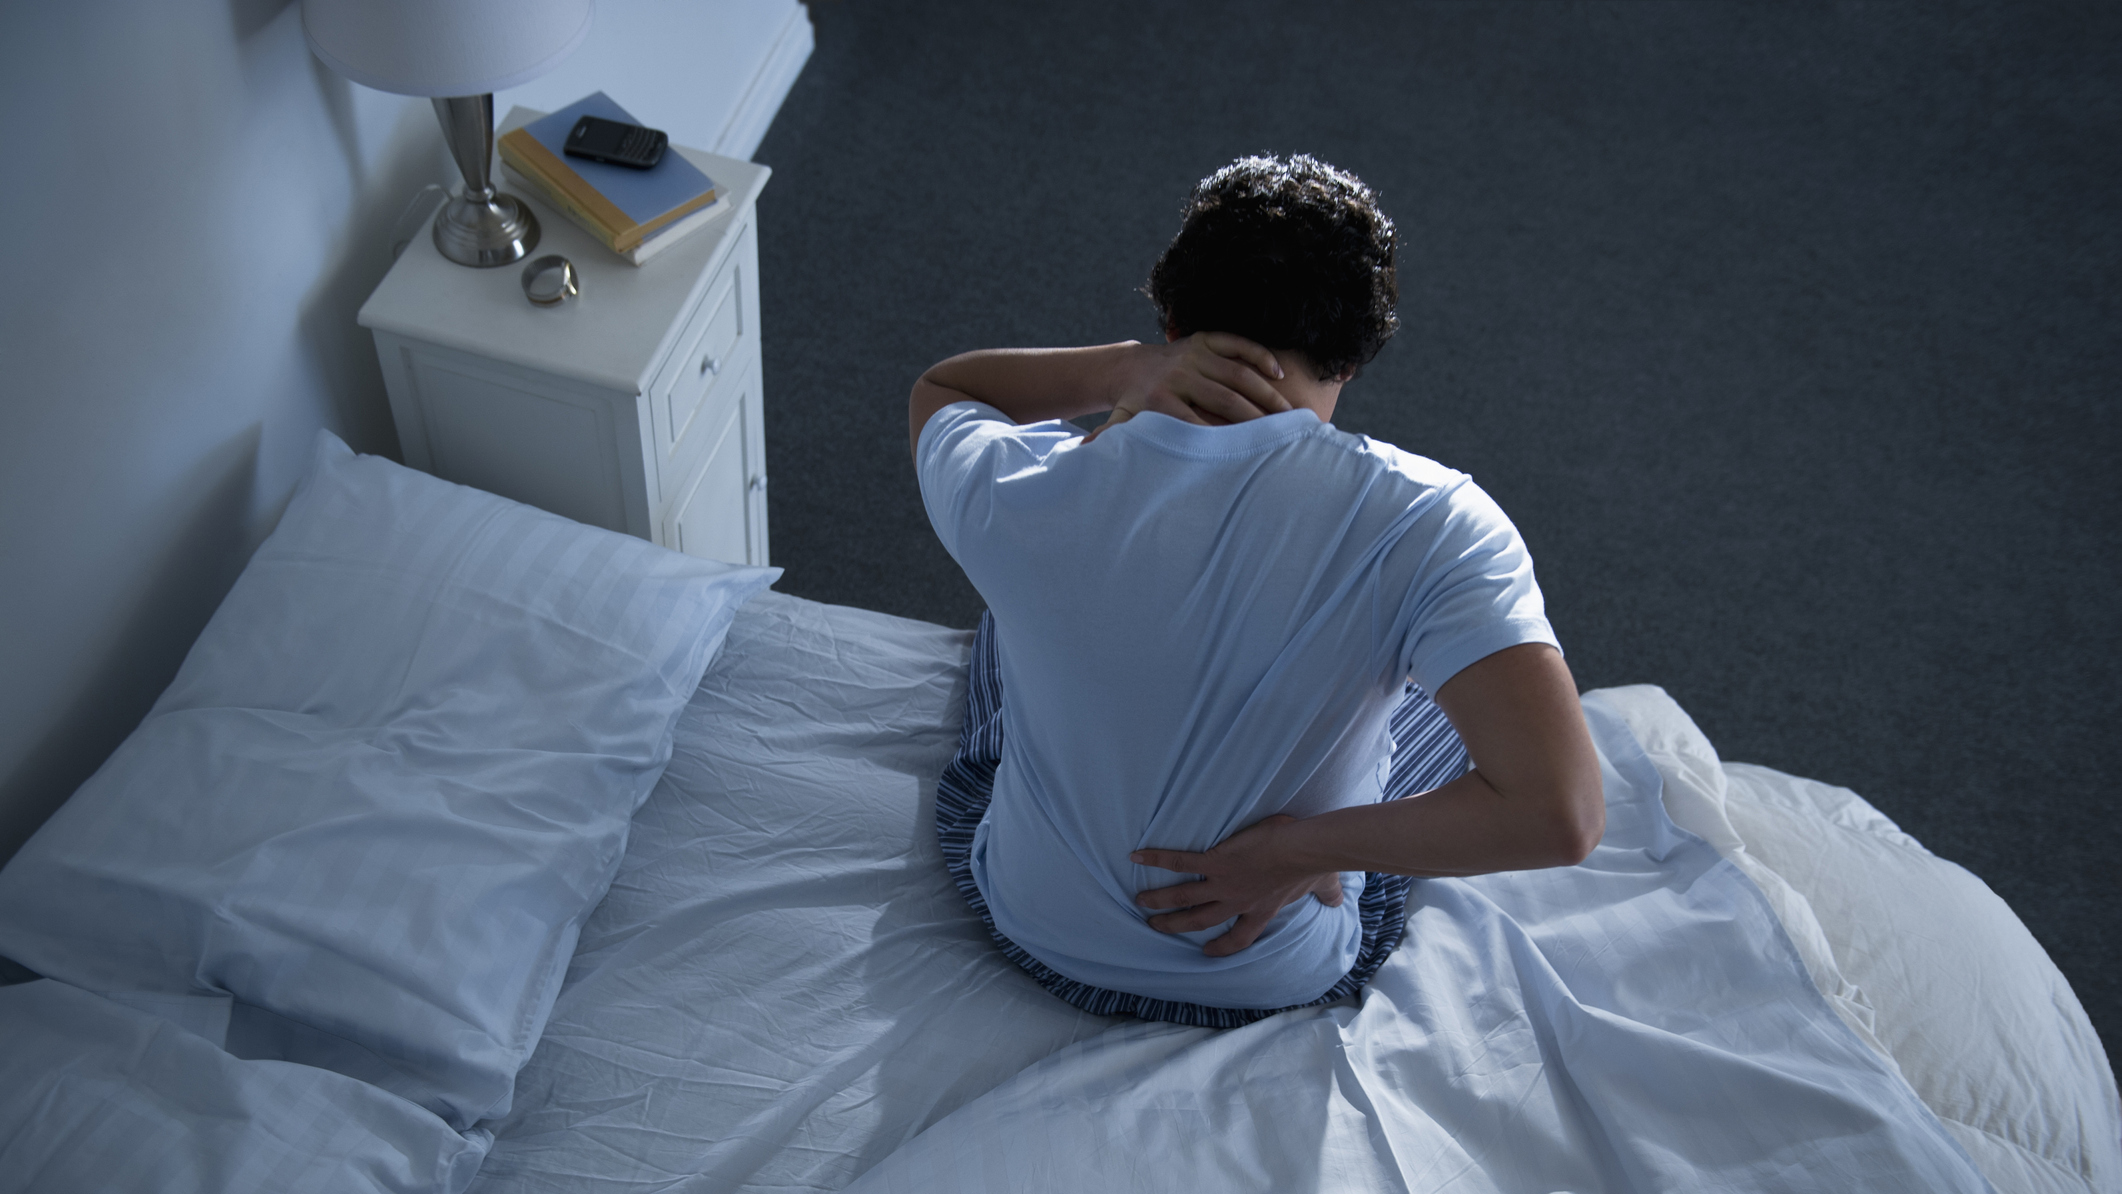 A man sits up in bed at night, holding one hand to his lower back because he's experiencing back pain